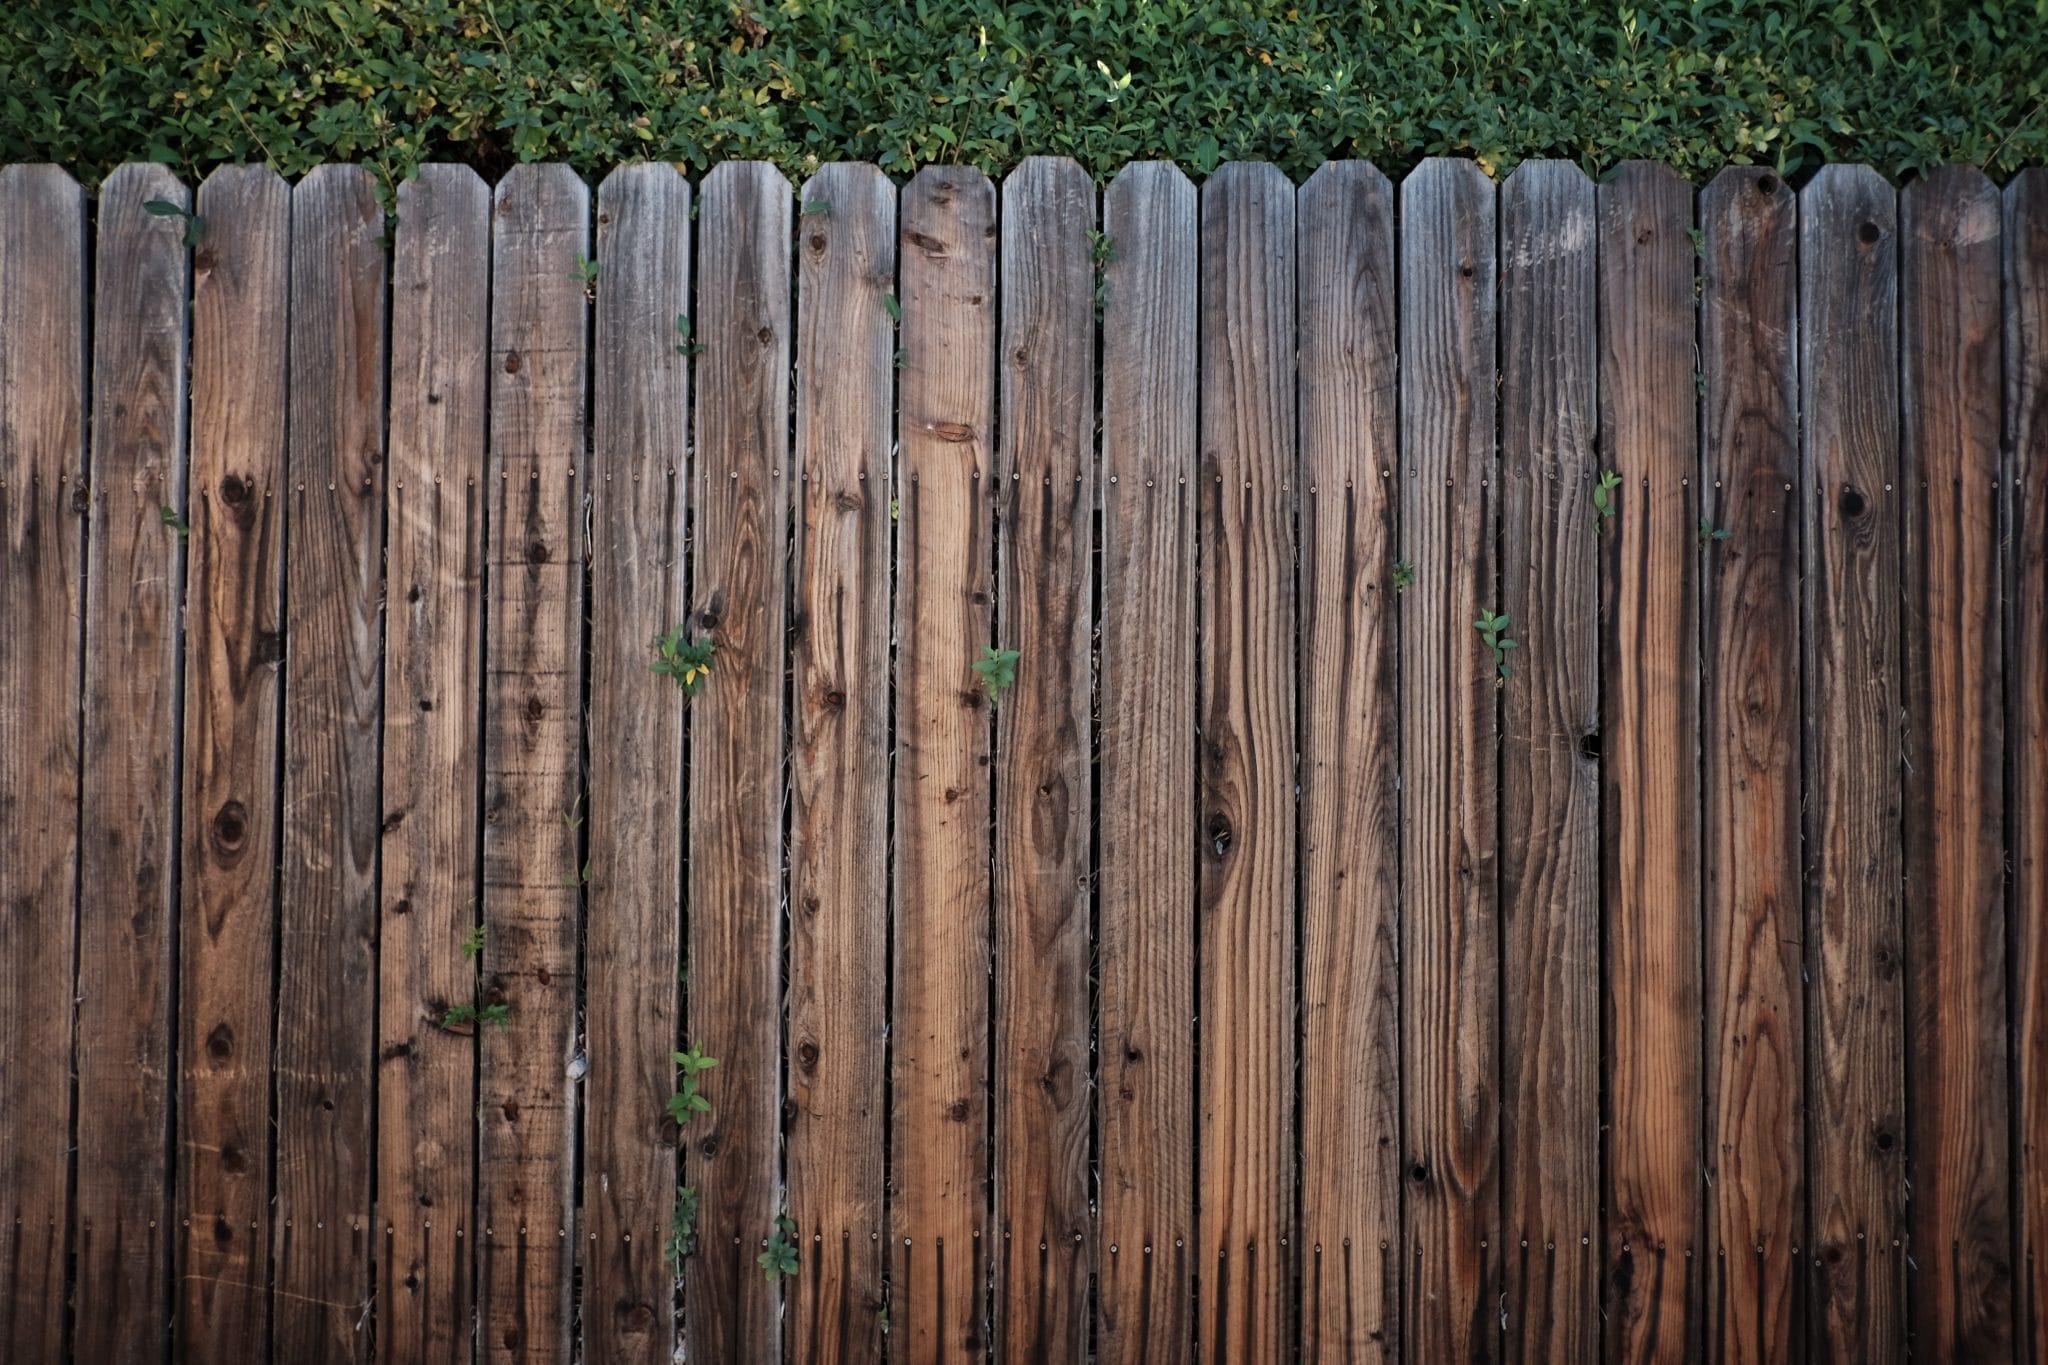 wood fence removal in west bend, wood fence repair and removal, residential and commercial fence removal